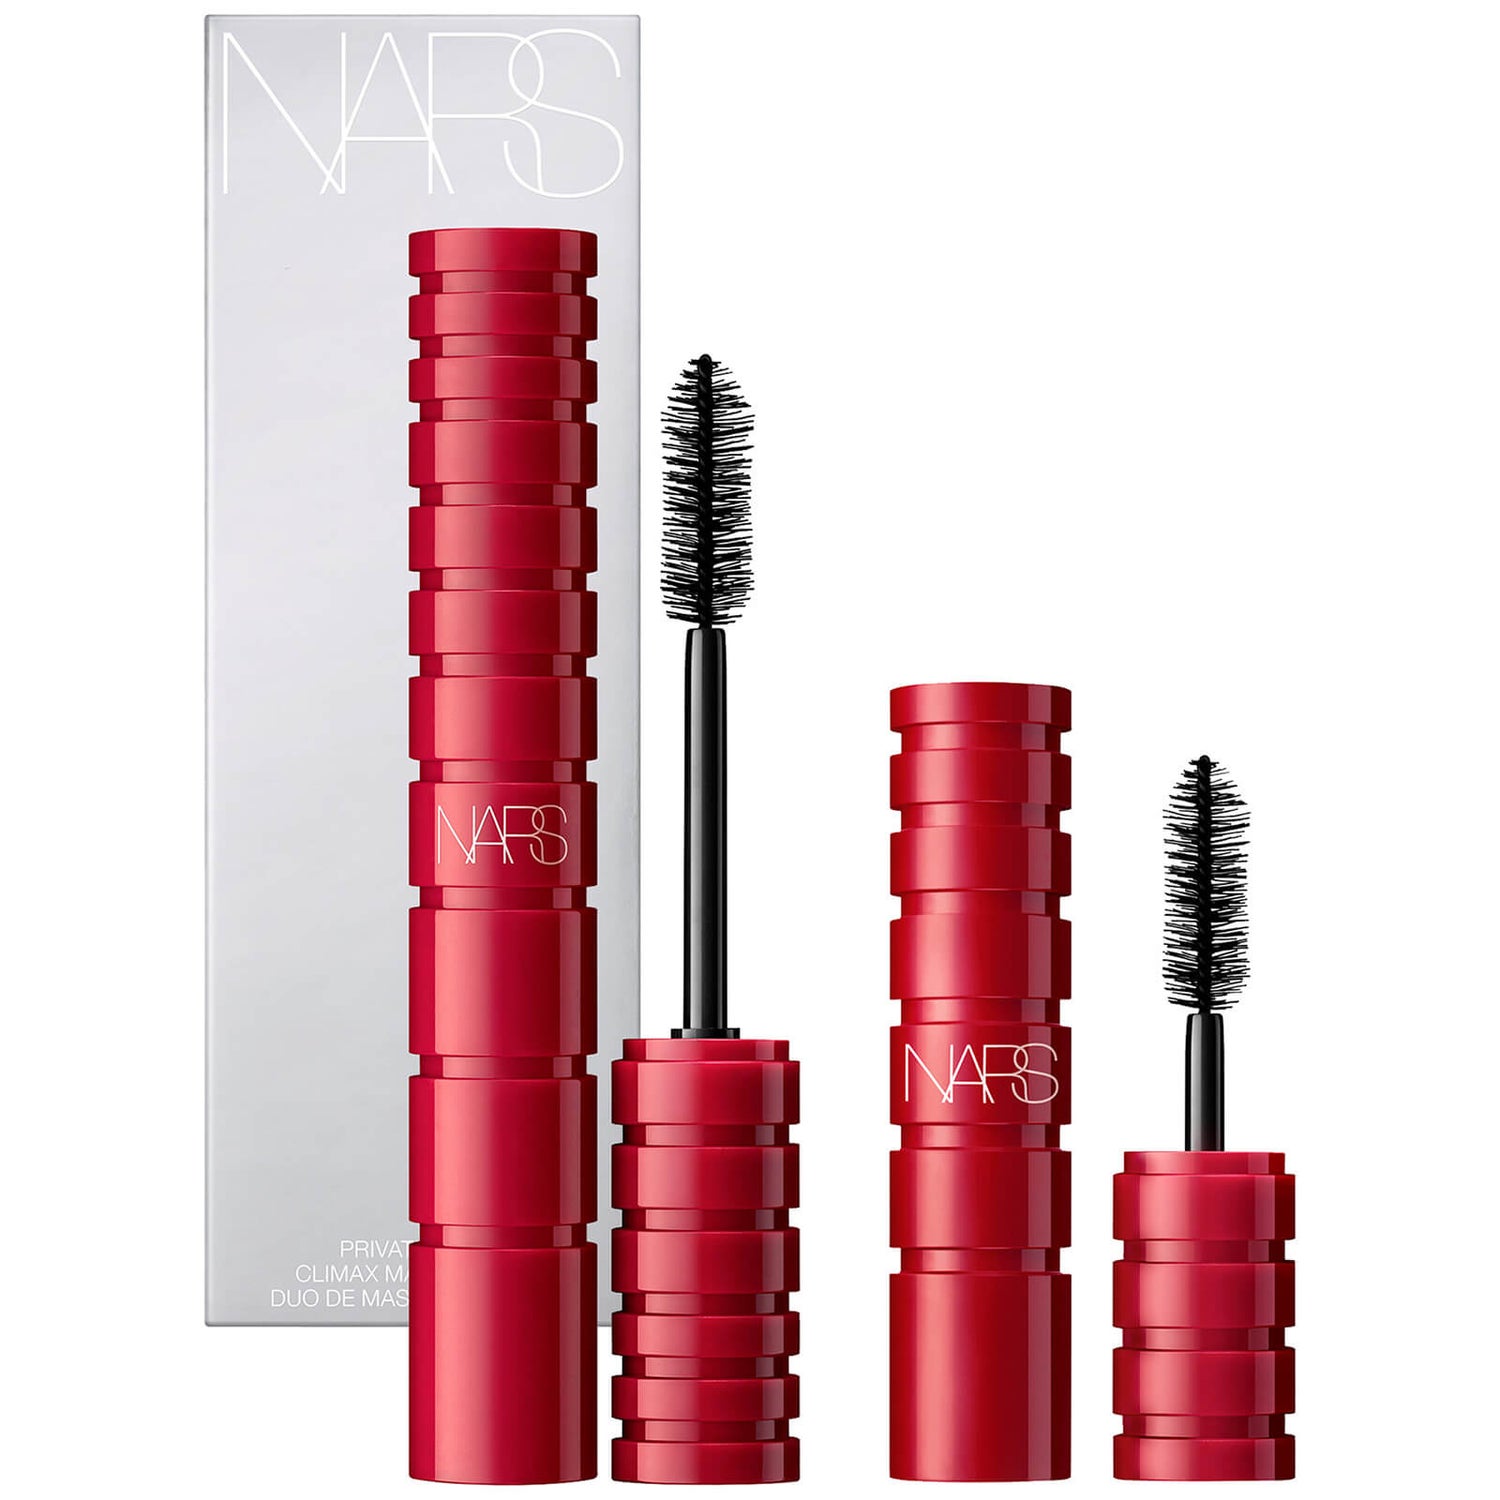 NARS Private Party Climax Mascara Duo - Explicit Black (Worth £40.50)